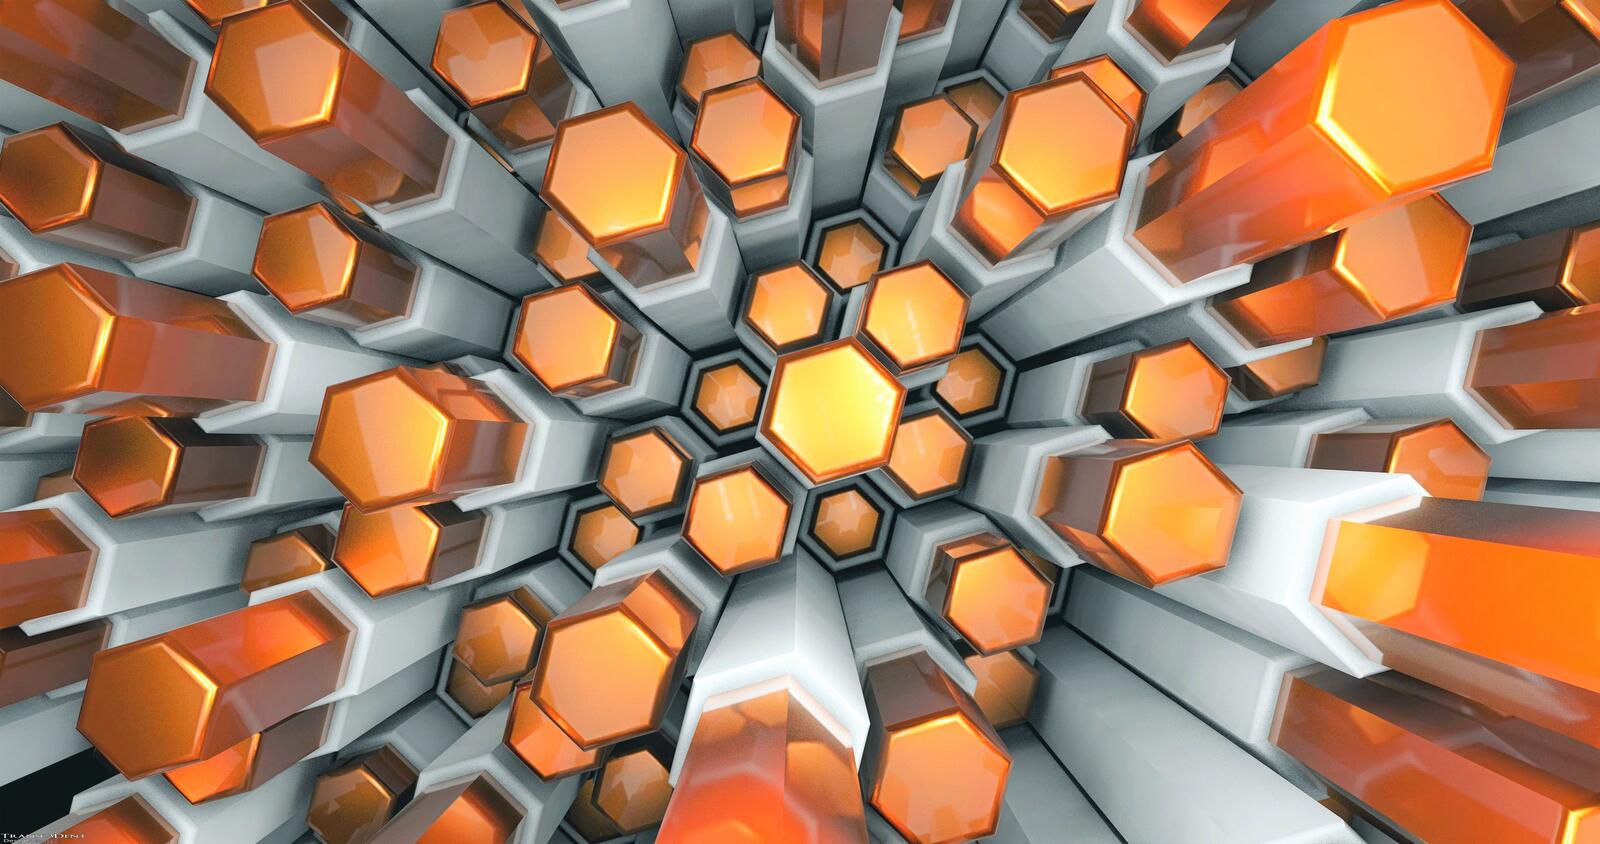 Wallpapers view from the top structure wallpaper hexagon towers on the desktop